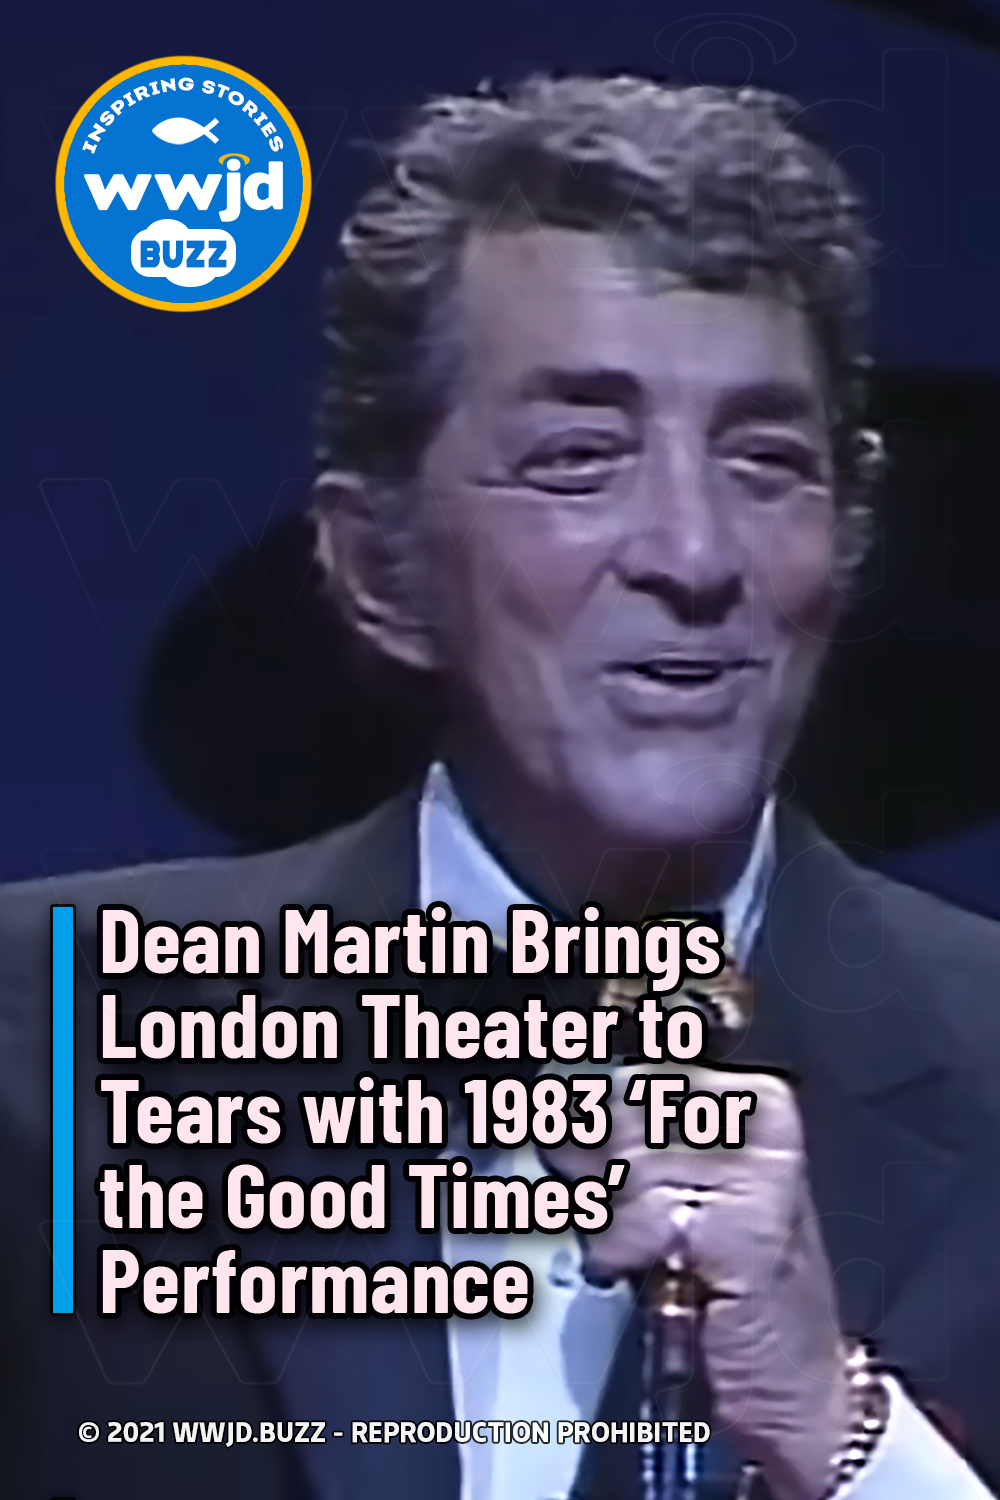 Dean Martin Brings London Theater to Tears with 1983 ‘For the Good Times’ Performance